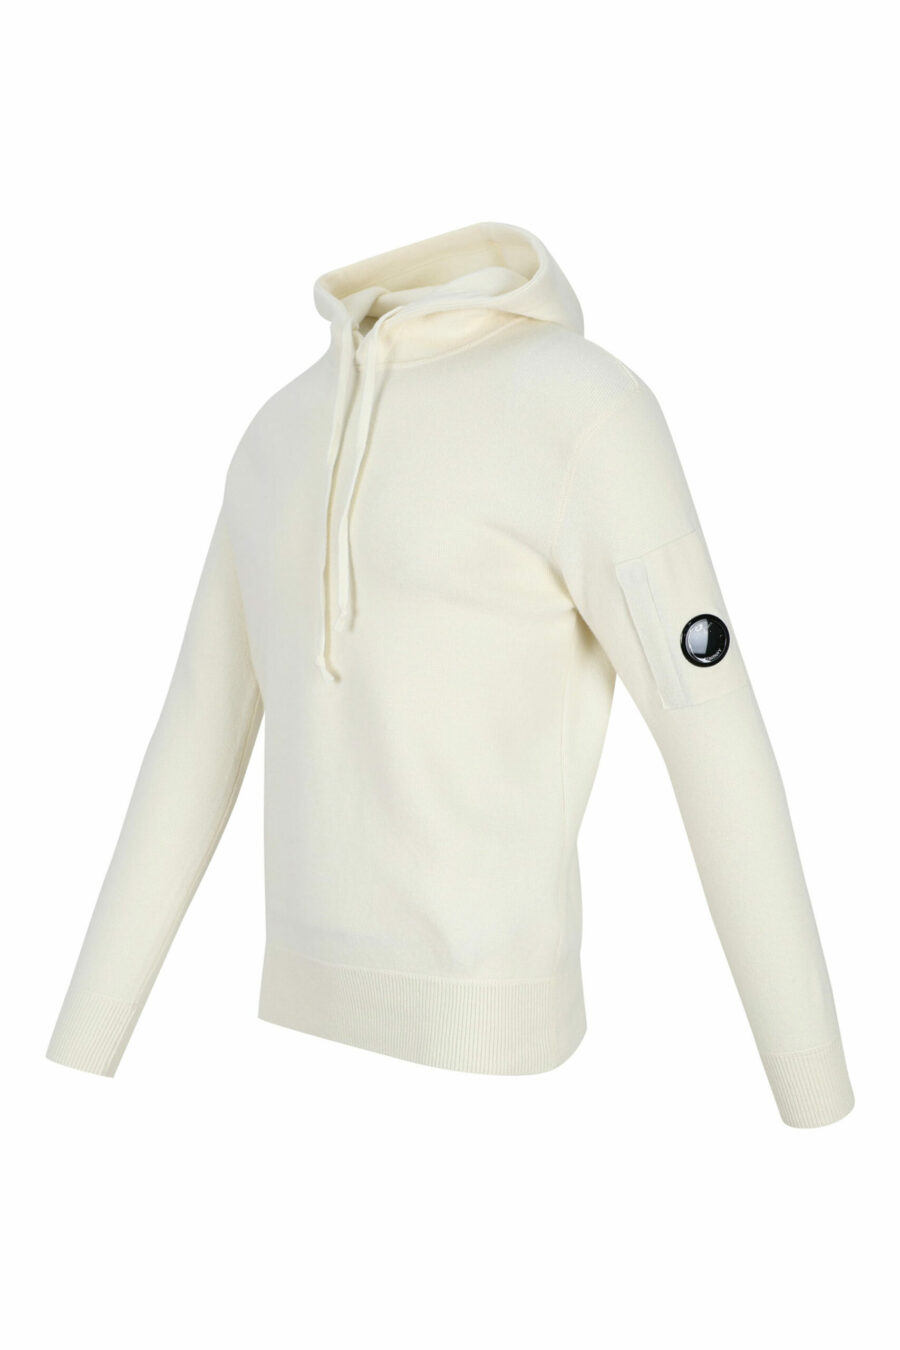 White hooded sweatshirt with side lens logo - 7620943634068 1 scaled